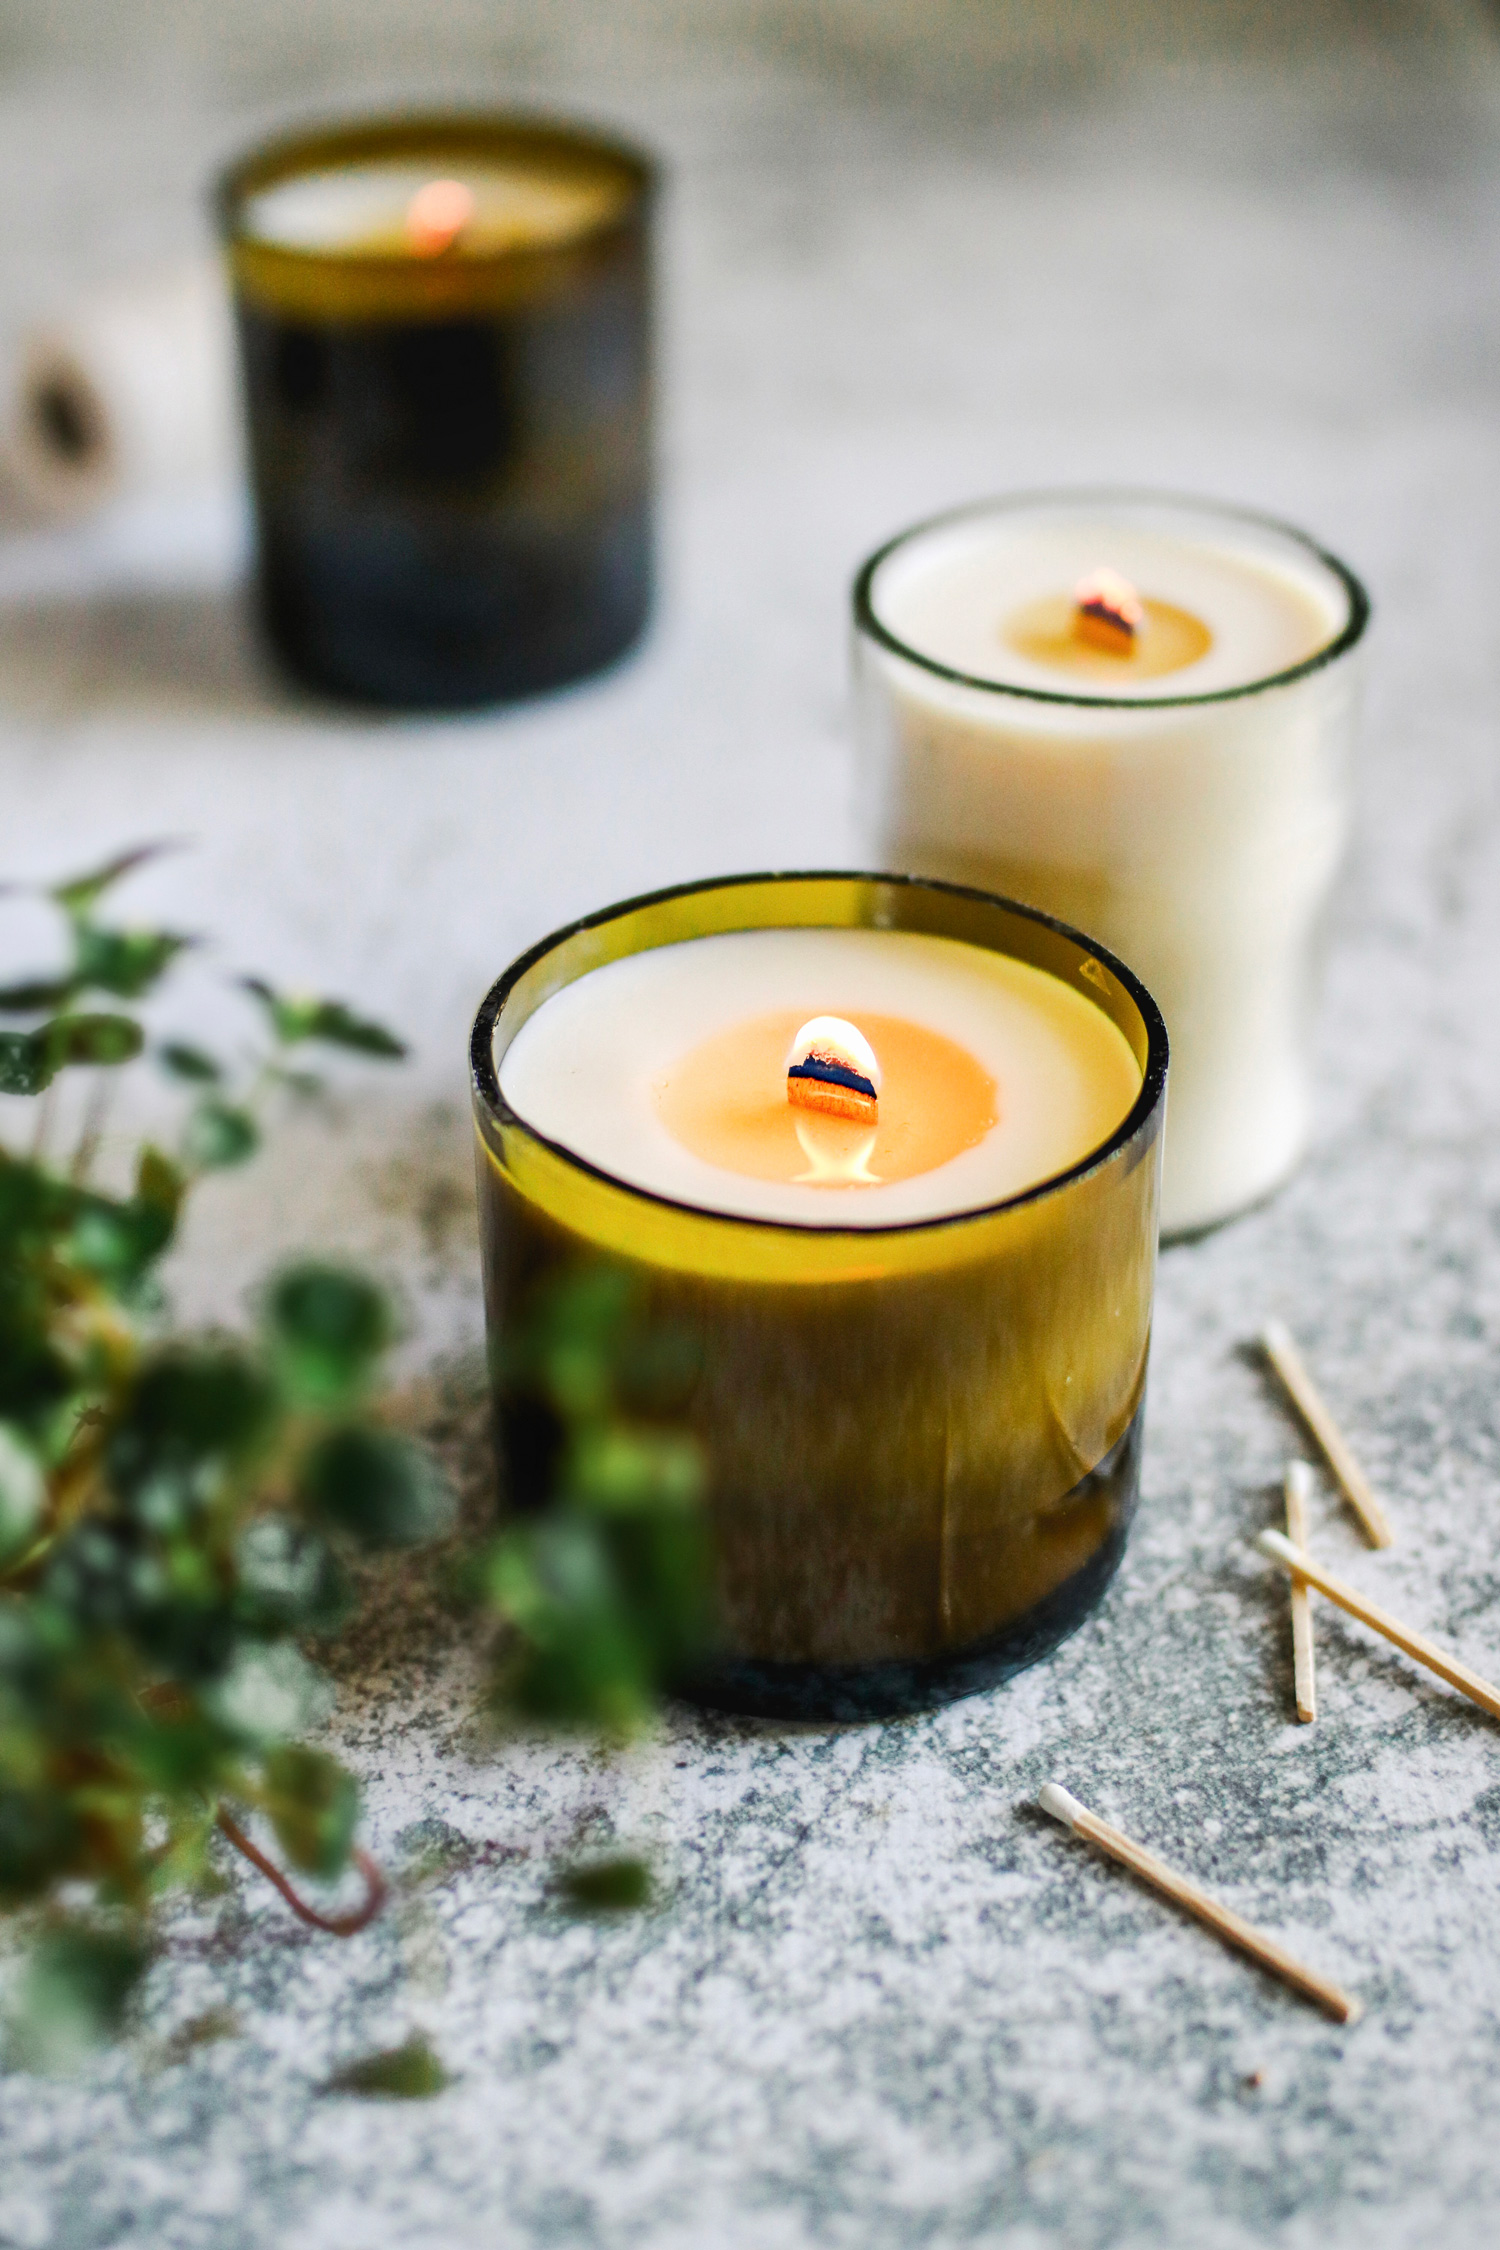 DIY Scented Candle Handmade Sand Painting Aromatherapy Candle